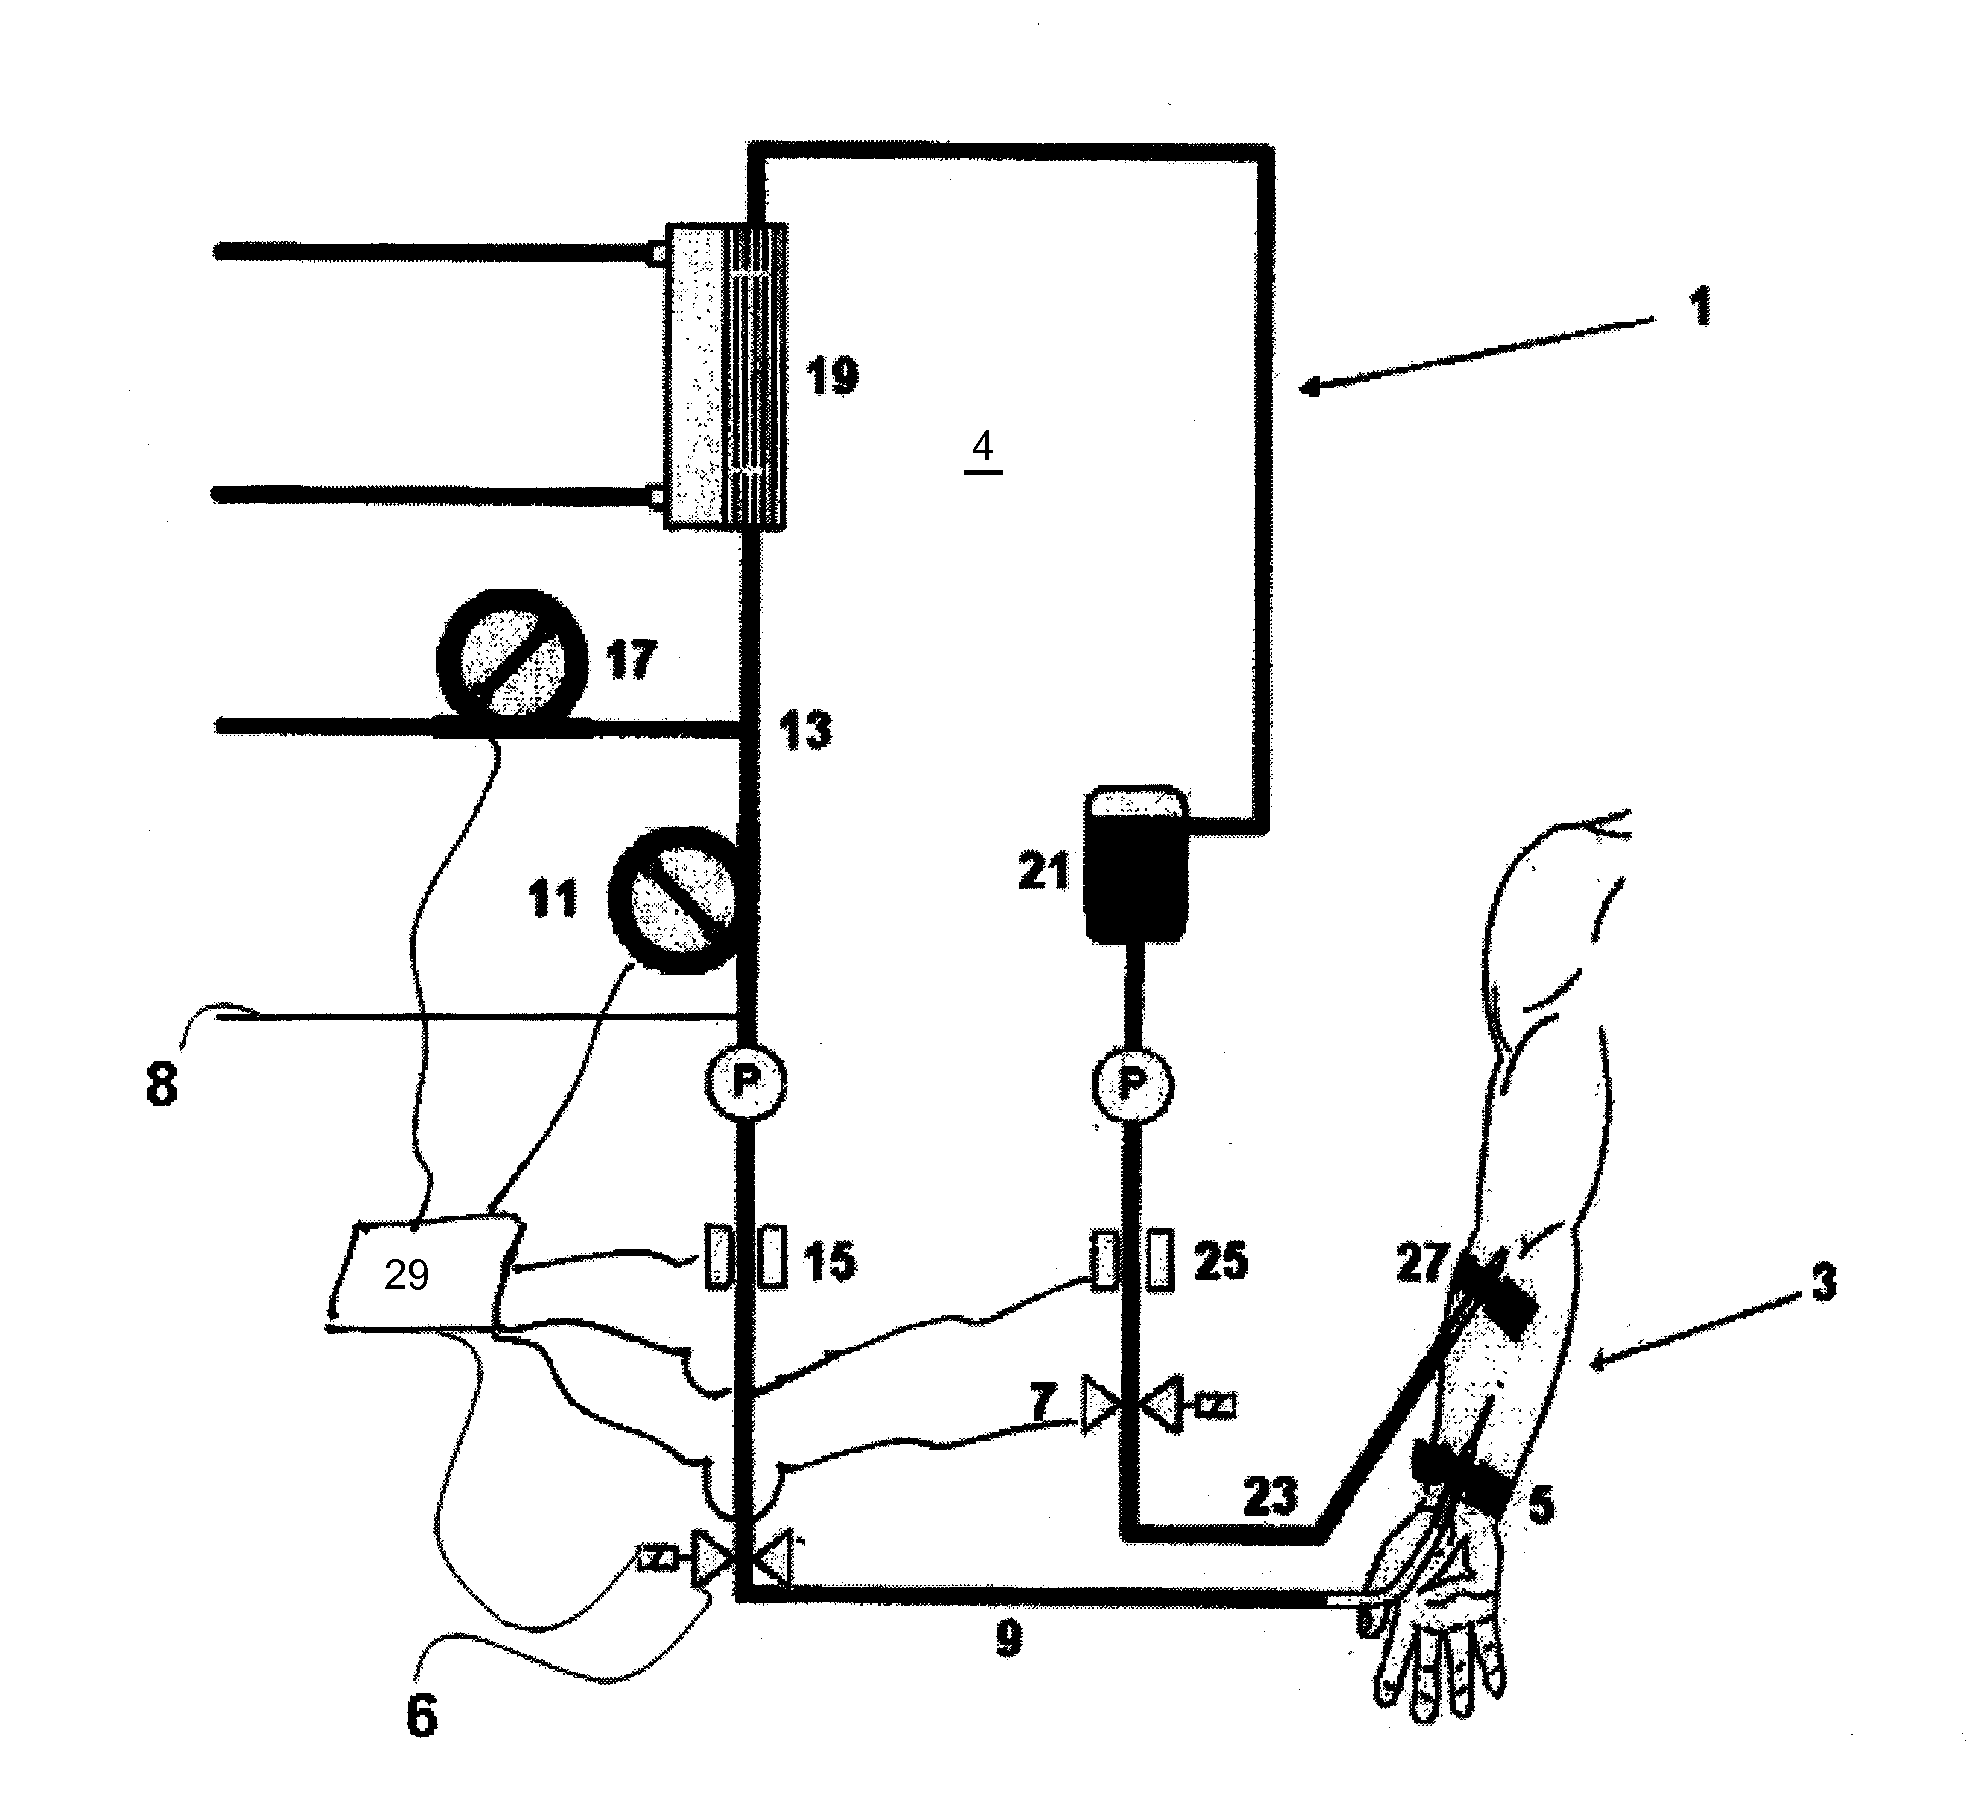 Method for removing blood from an extracorporeal blood circuit for a treatment apparatus following termination of a blood treatment session, and apparatus for performing said method